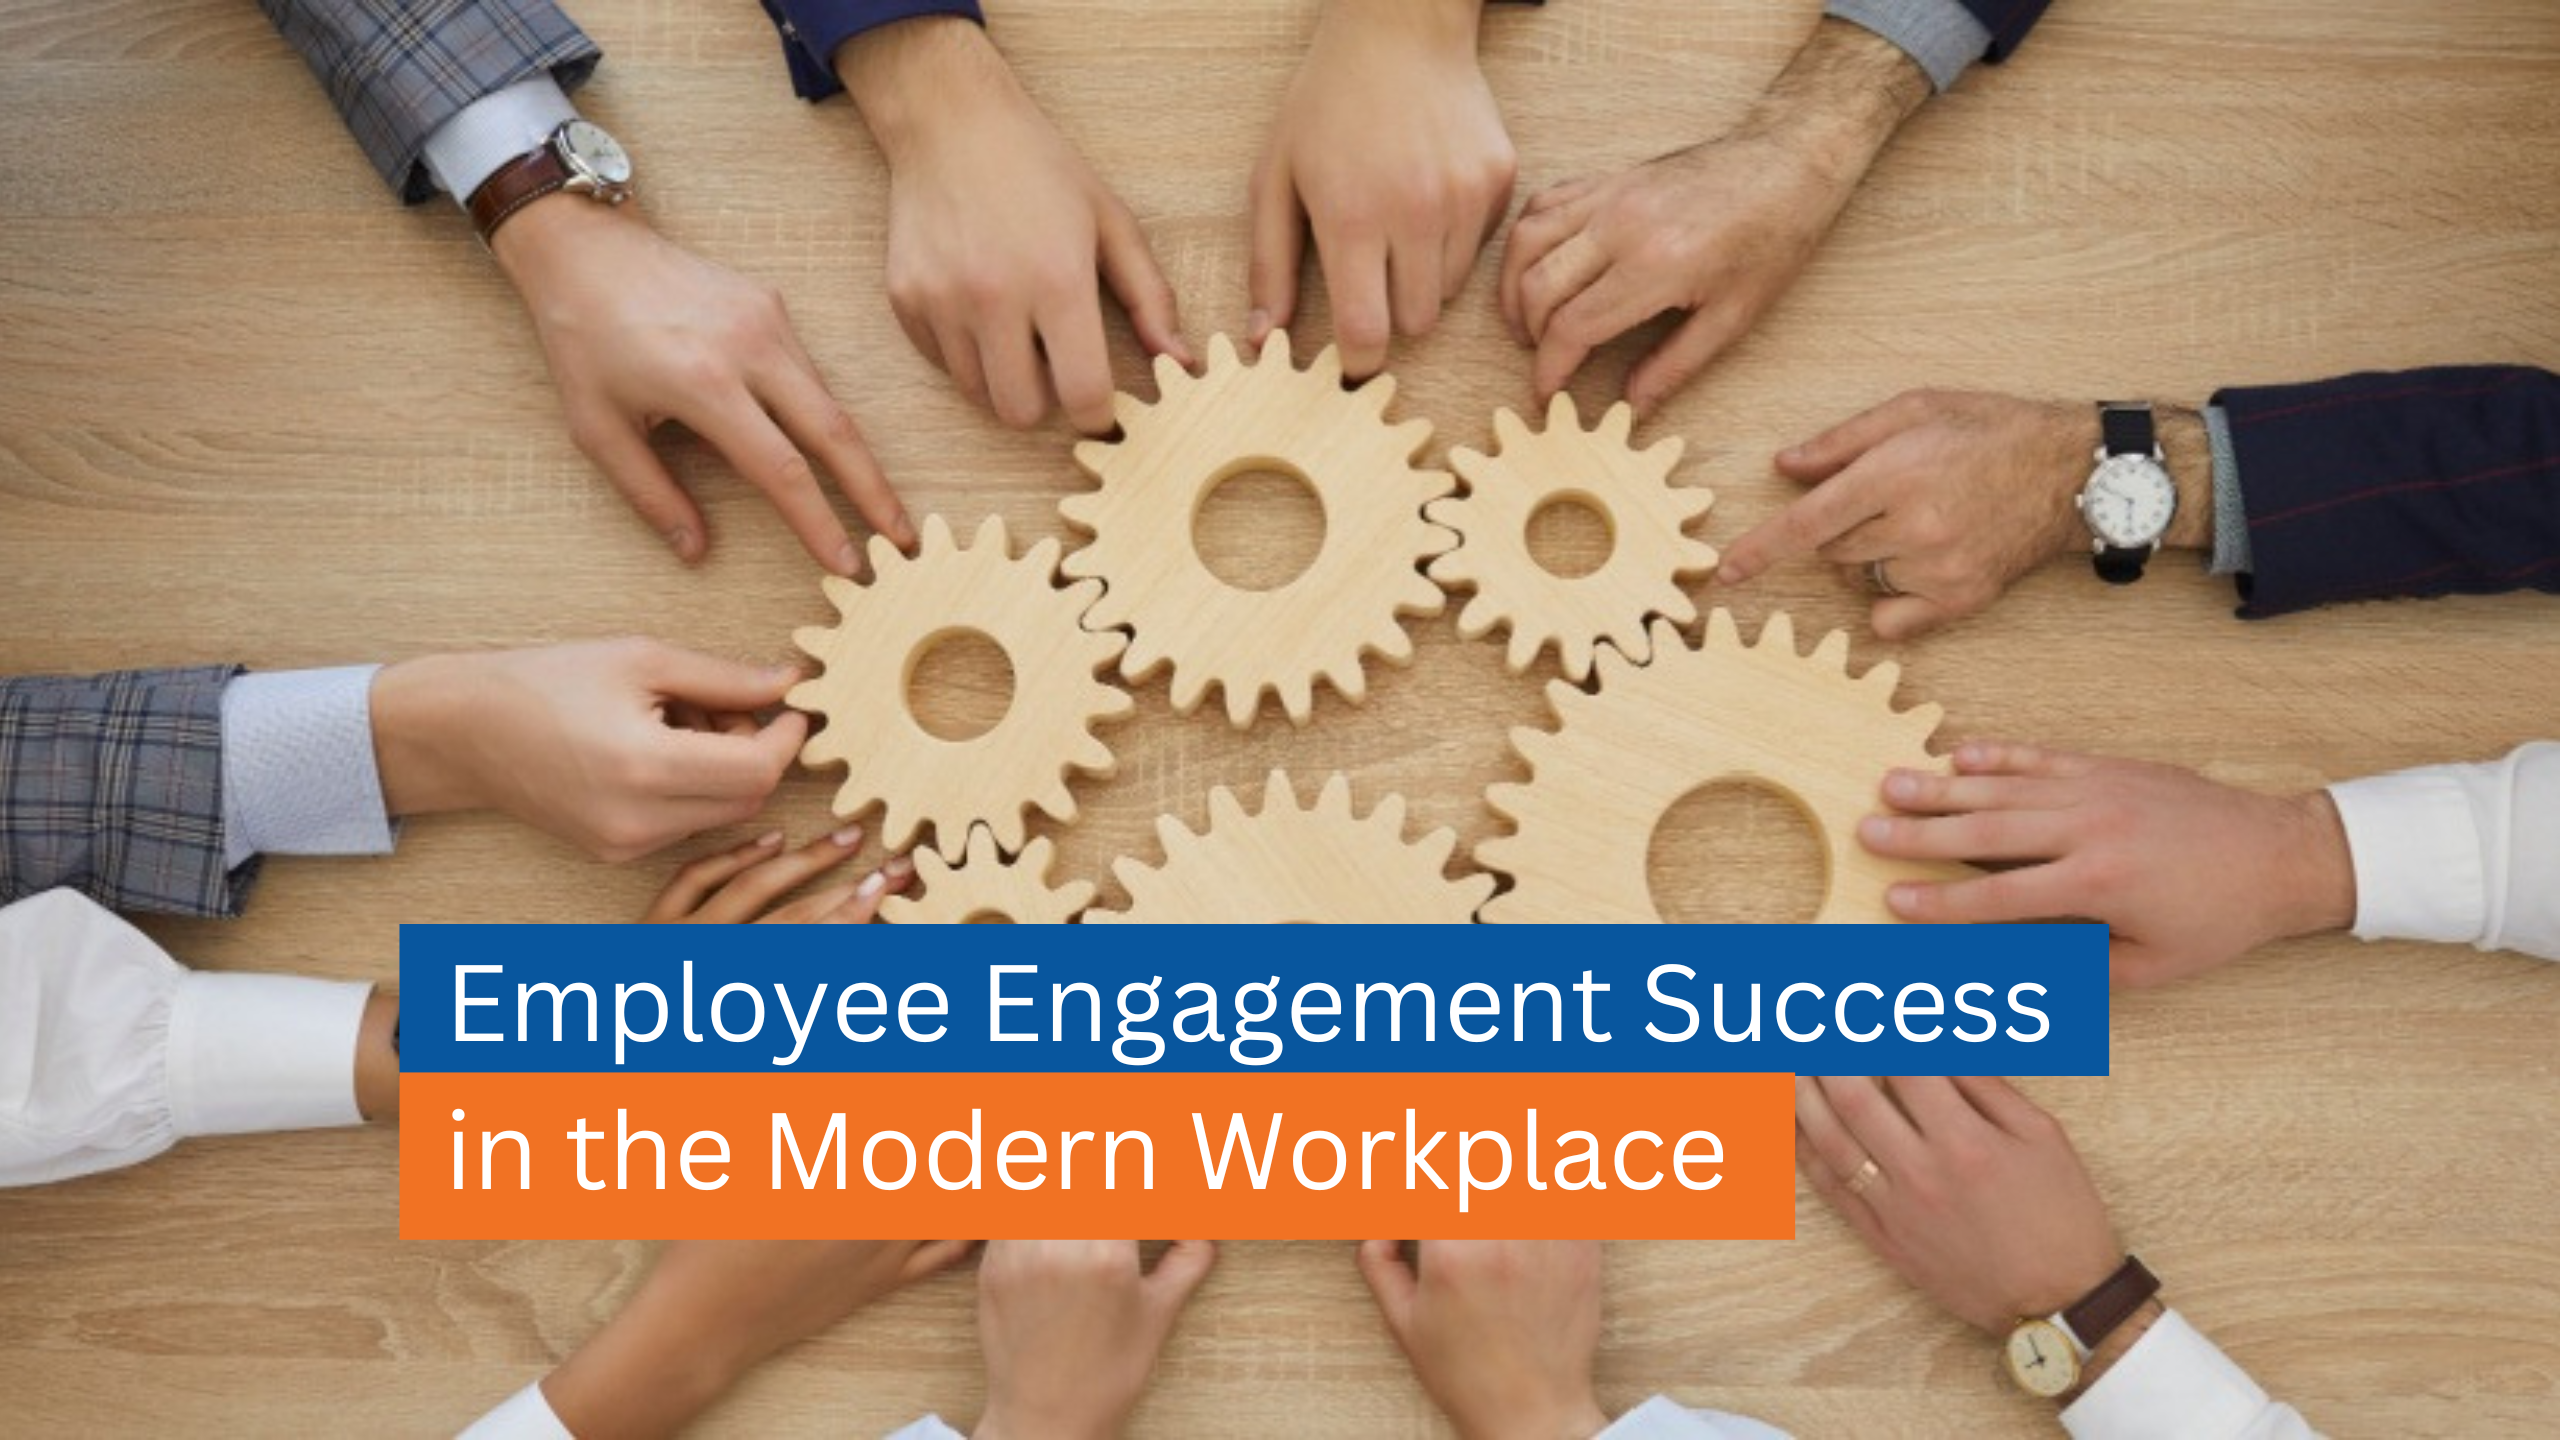 Employee Engagement Success in the Modern Workplace